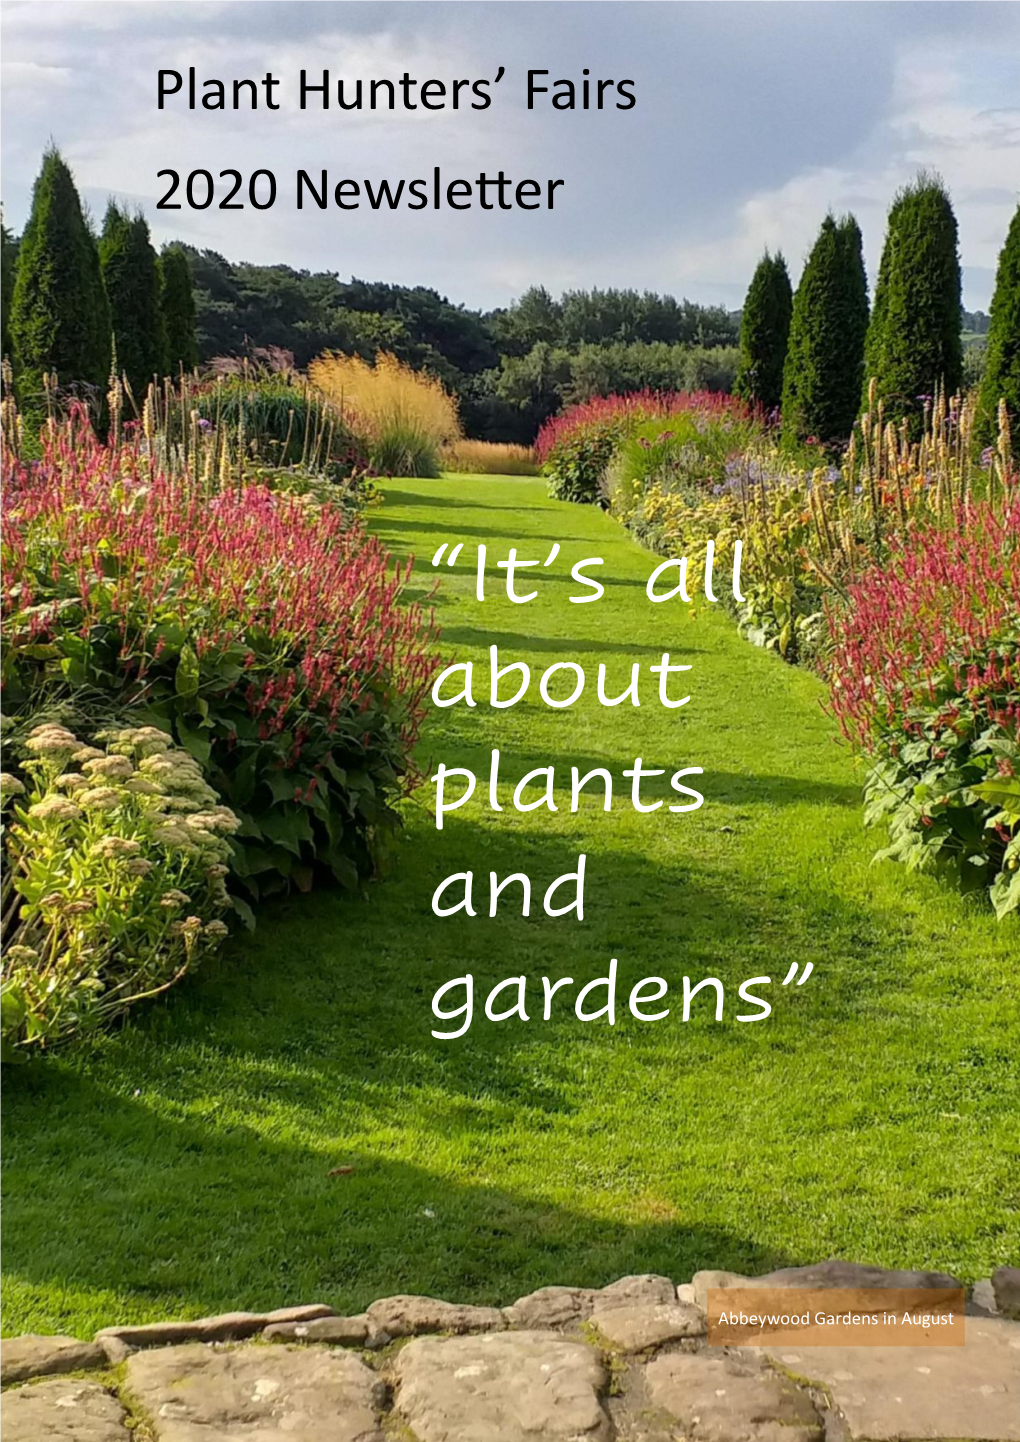 “It's All About Plants and Gardens”